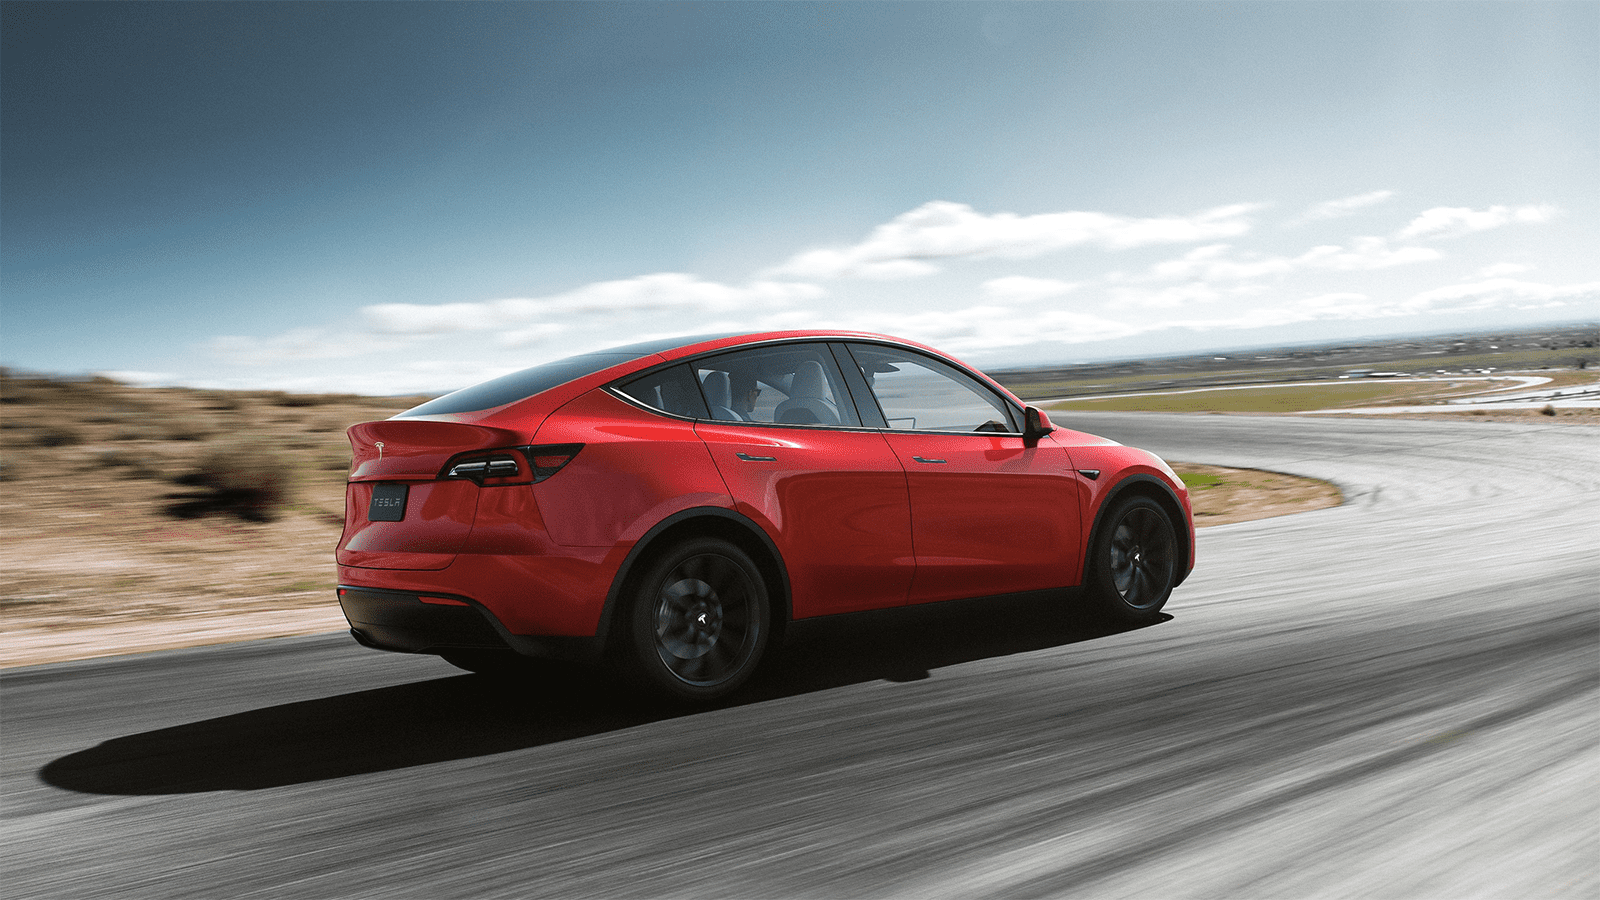 Just days after dramatically slashing prices and sending resale values into a tailspin, Tesla has quietly raised prices on its Model Y.